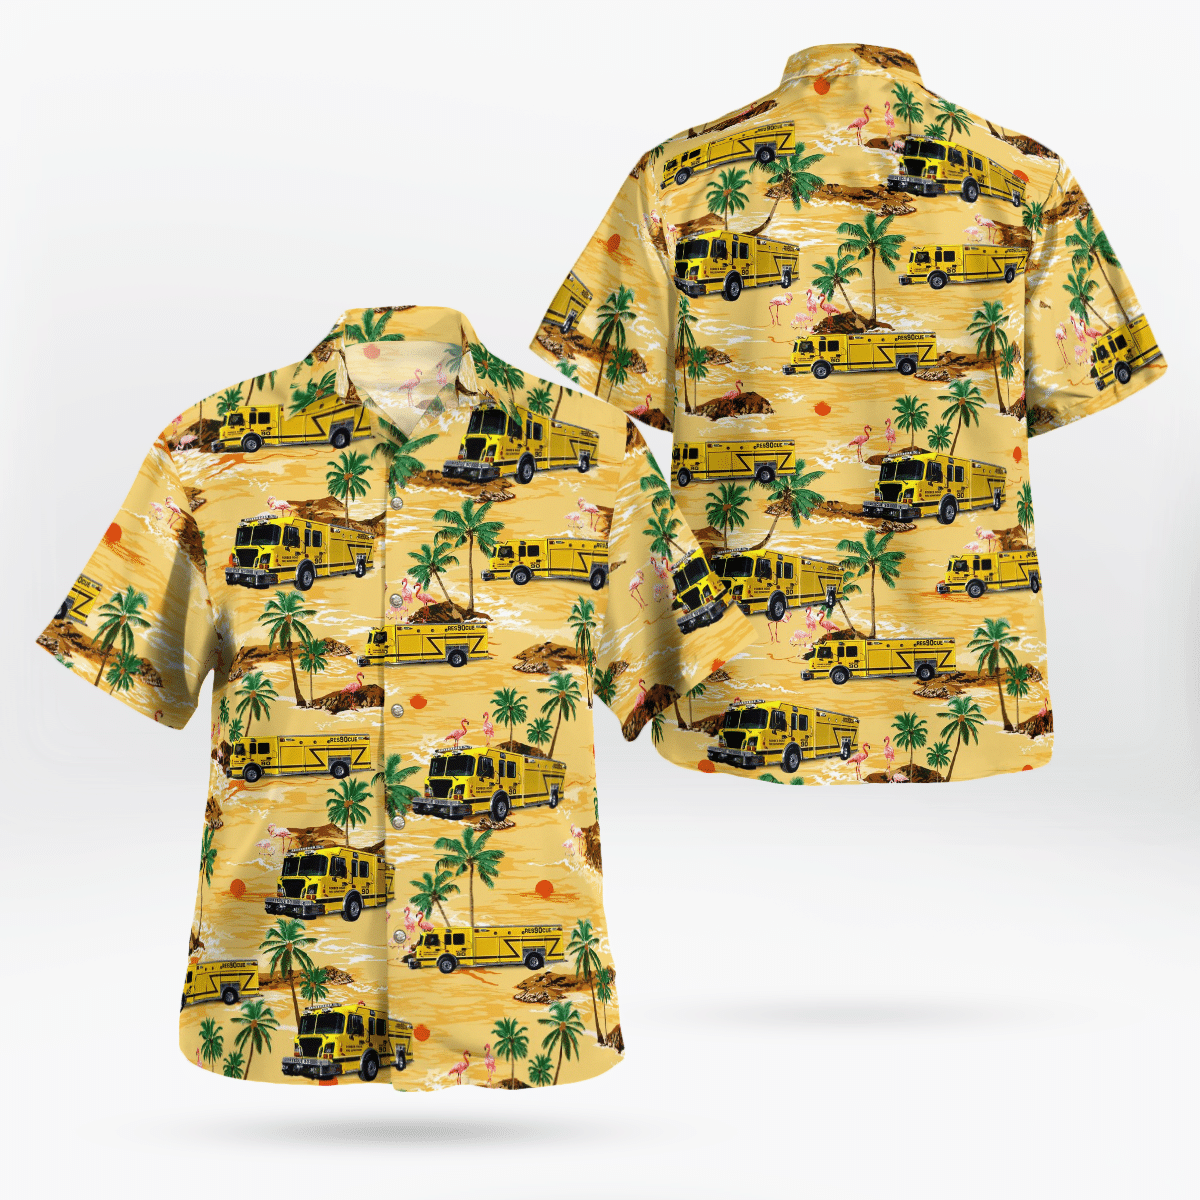 If you are in need of a new summertime look, pick up this Hawaiian shirt 247